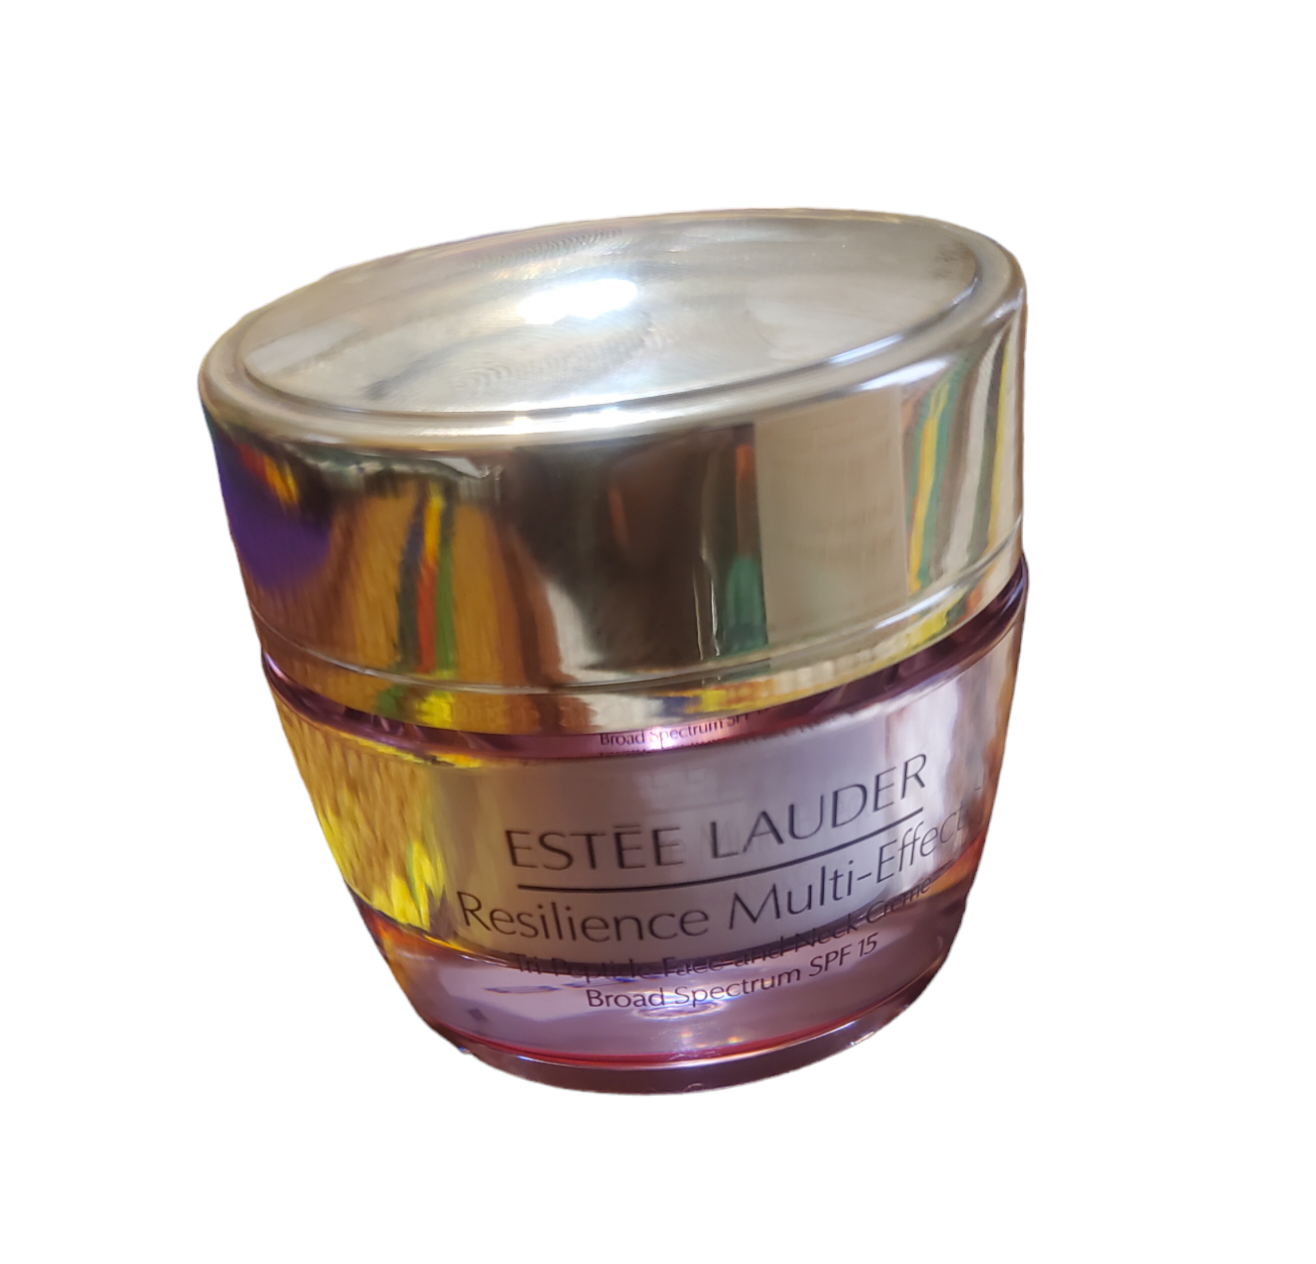 Estee Lauder Resilience Lift Face and Neck Cream SPF 15, .5 Oz.  - £14.94 GBP